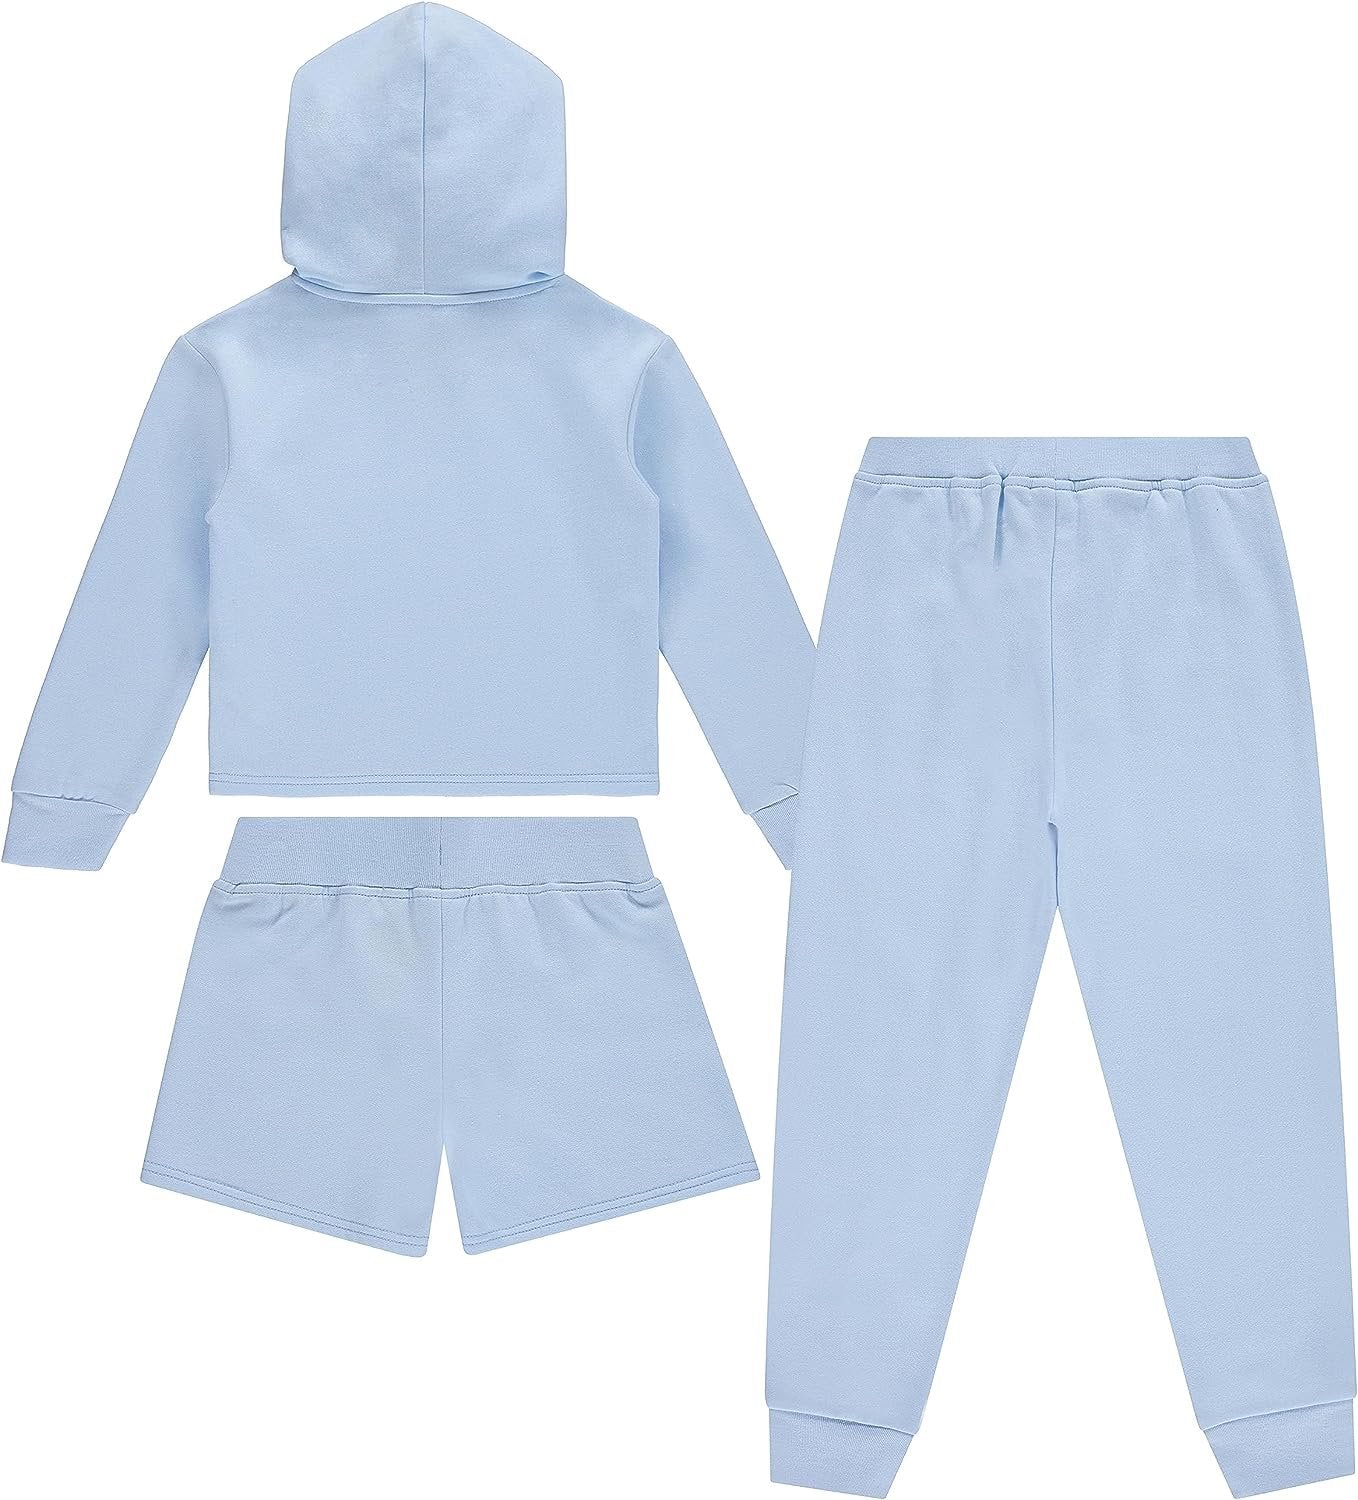 L.O.L. Surprise! Pullover Hoodie,Shorts and Jogger Clothing Set - Sizes 4-16